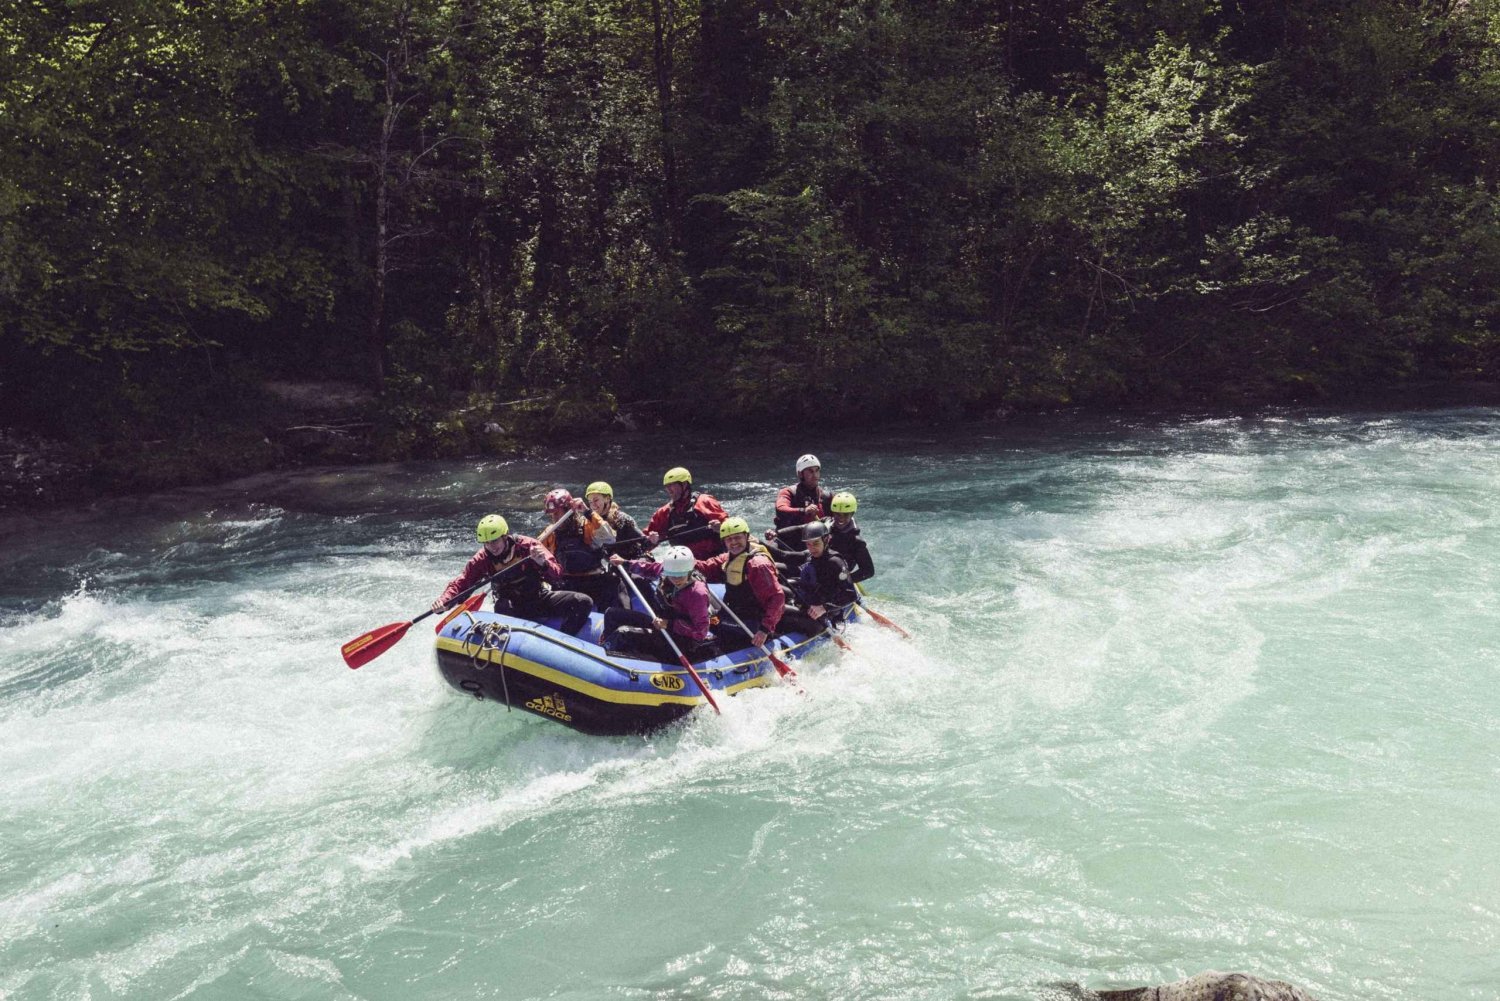 Rafting on Isar close to Munich